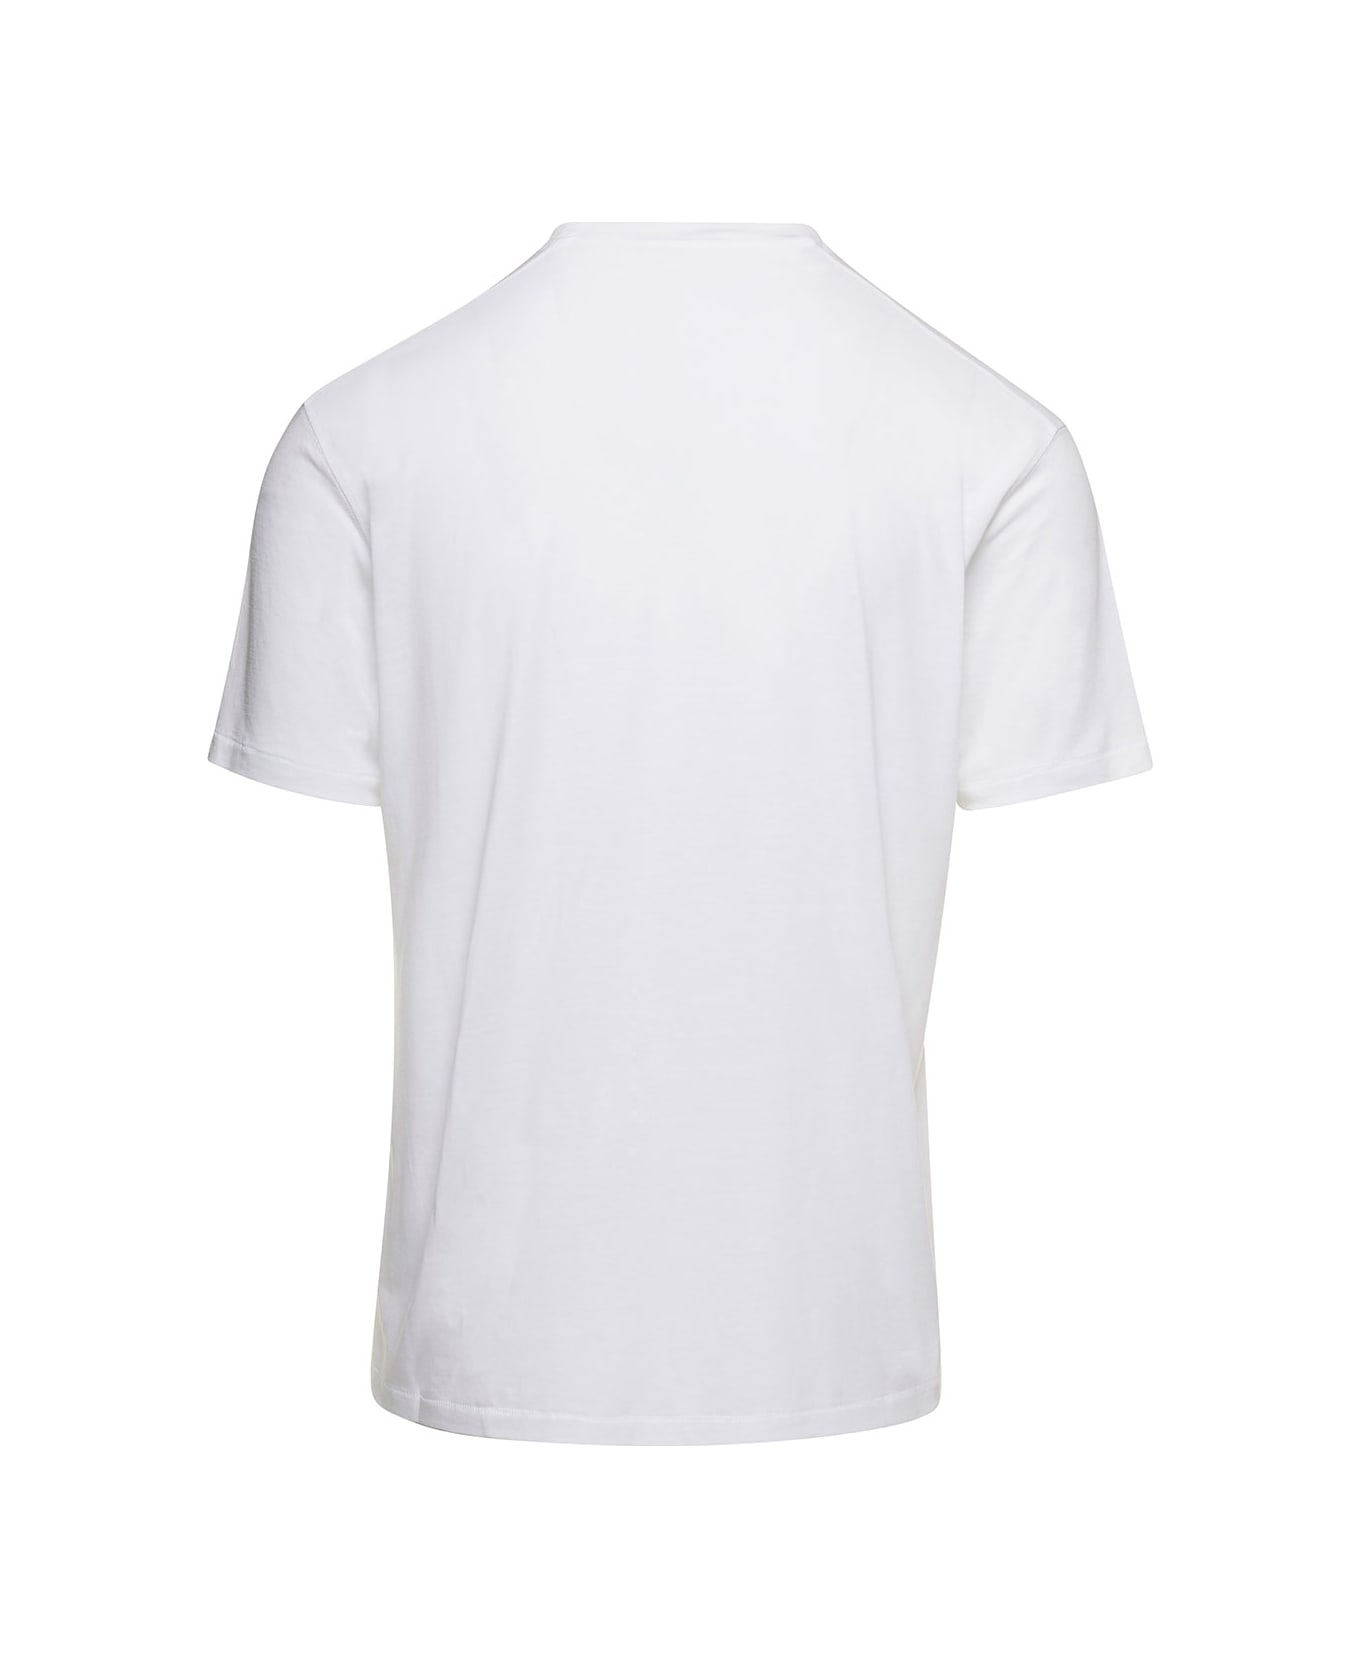 Tom Ford White Basic Crewneck T-shirt With Tonal Stitching In Cotton Blend Man - White